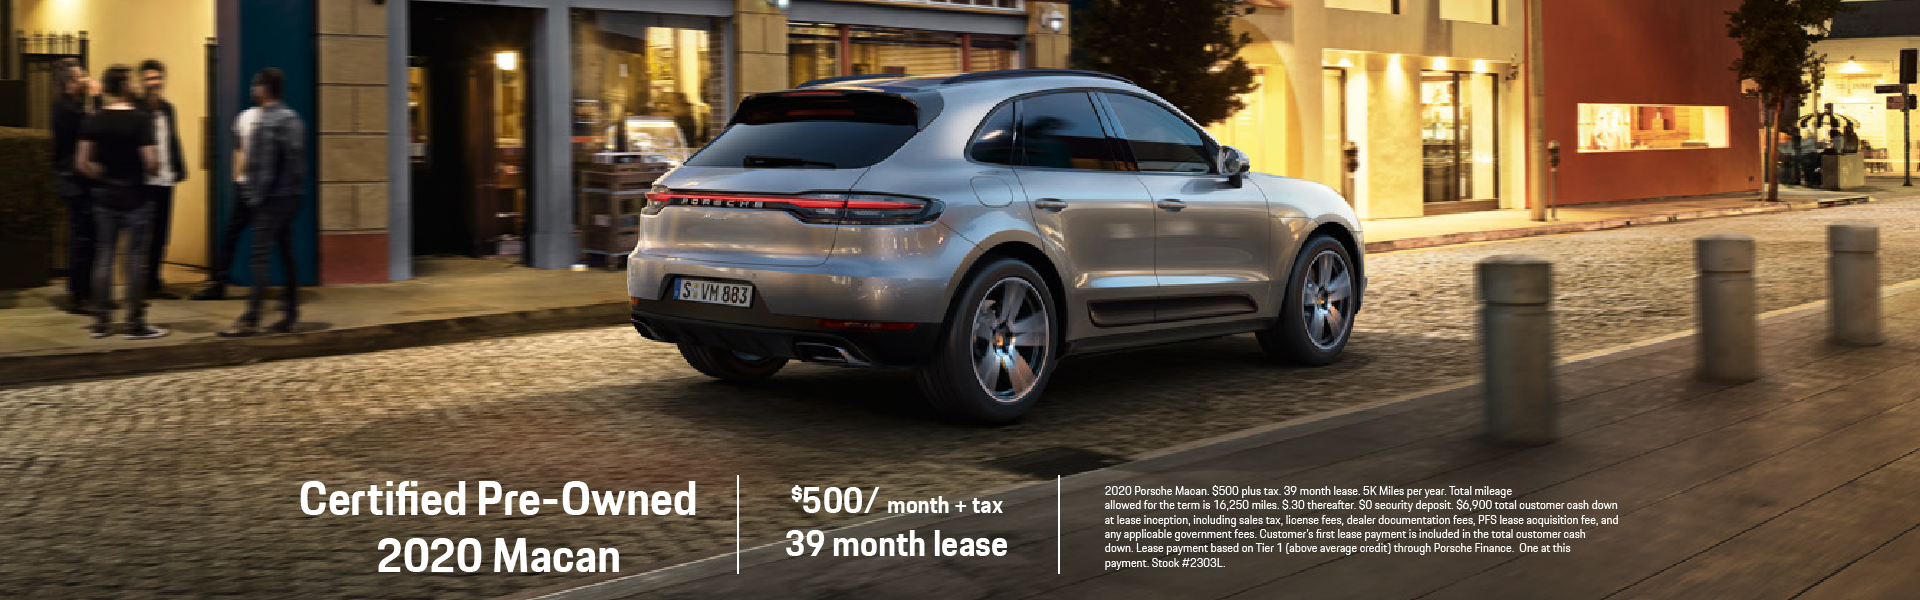 2020 Certified Pre-Owned Macan available at Porsche Stevens Creek